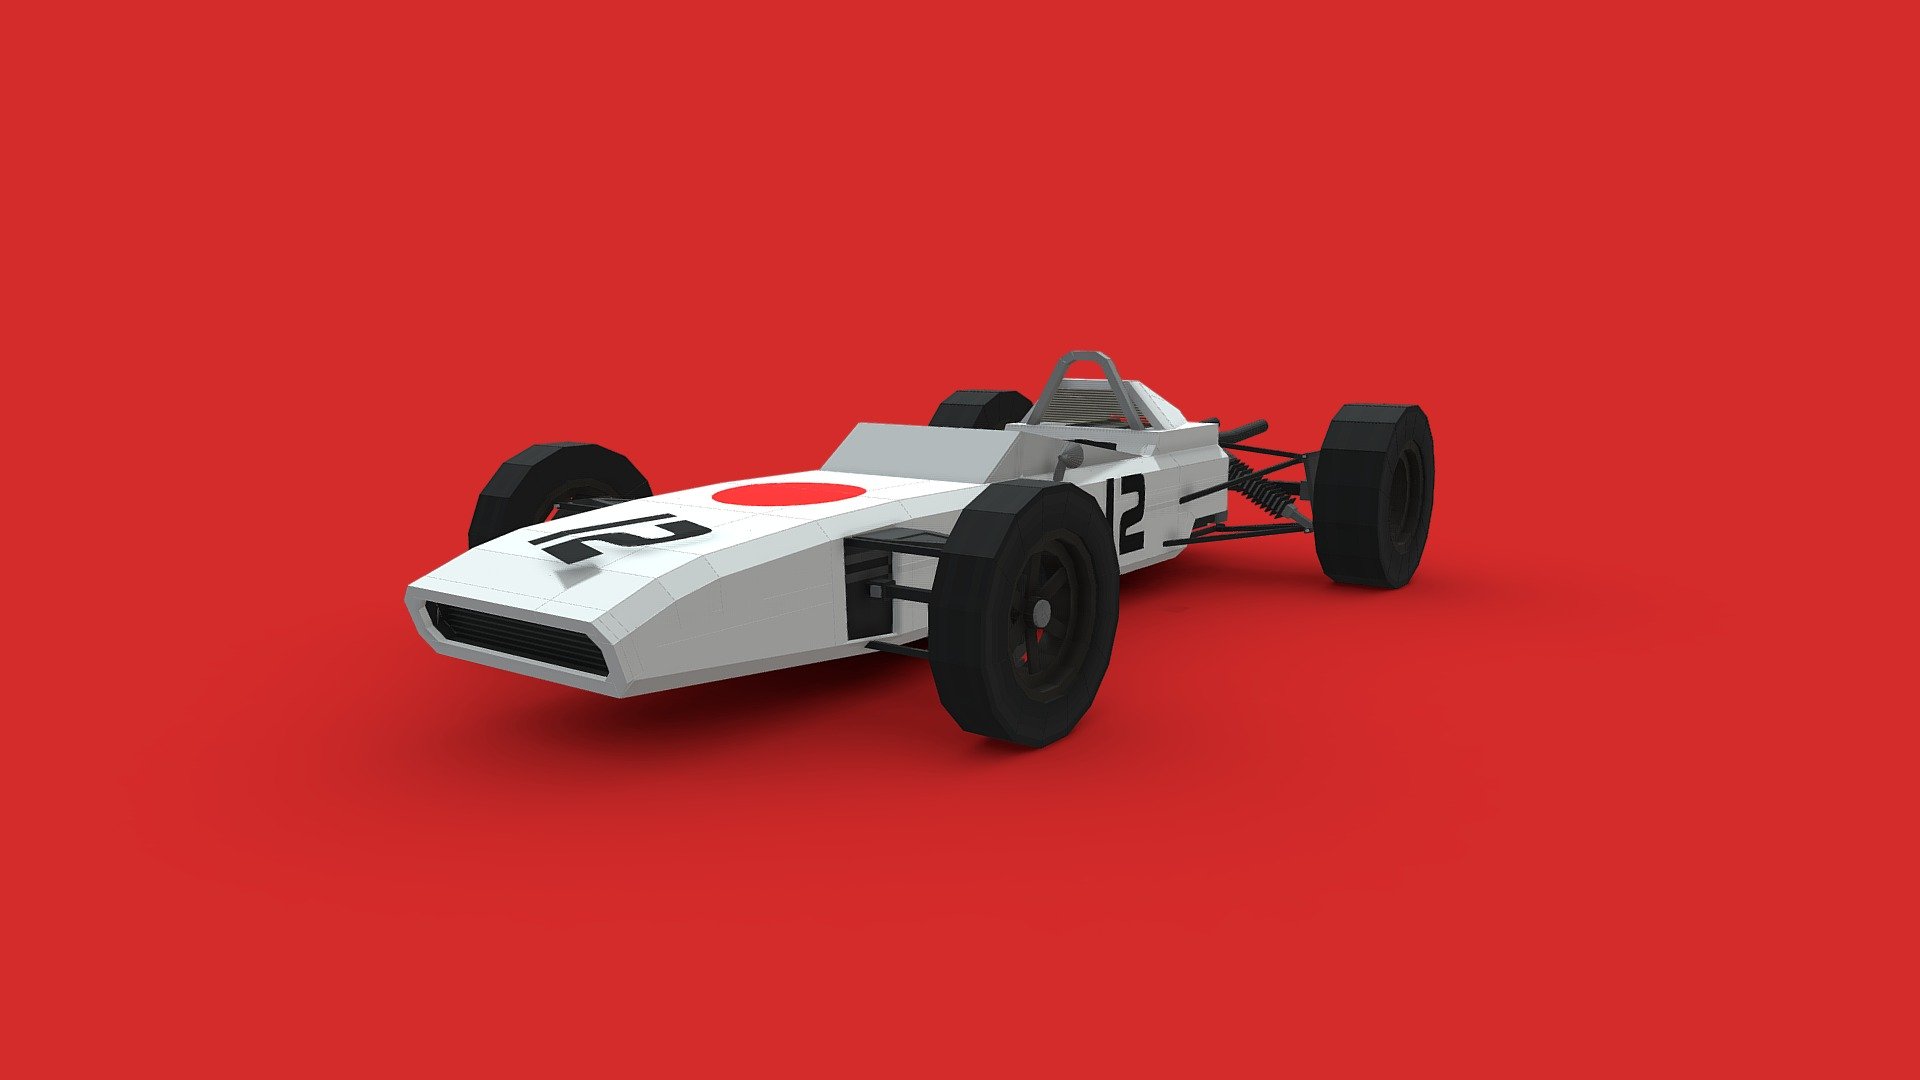 Replica of the 1965 Honda RA272 used in the FIA’s F1 championship in 1965. The first Japanese car to win a F1 Grand Prix. A MC:BE model 3d model